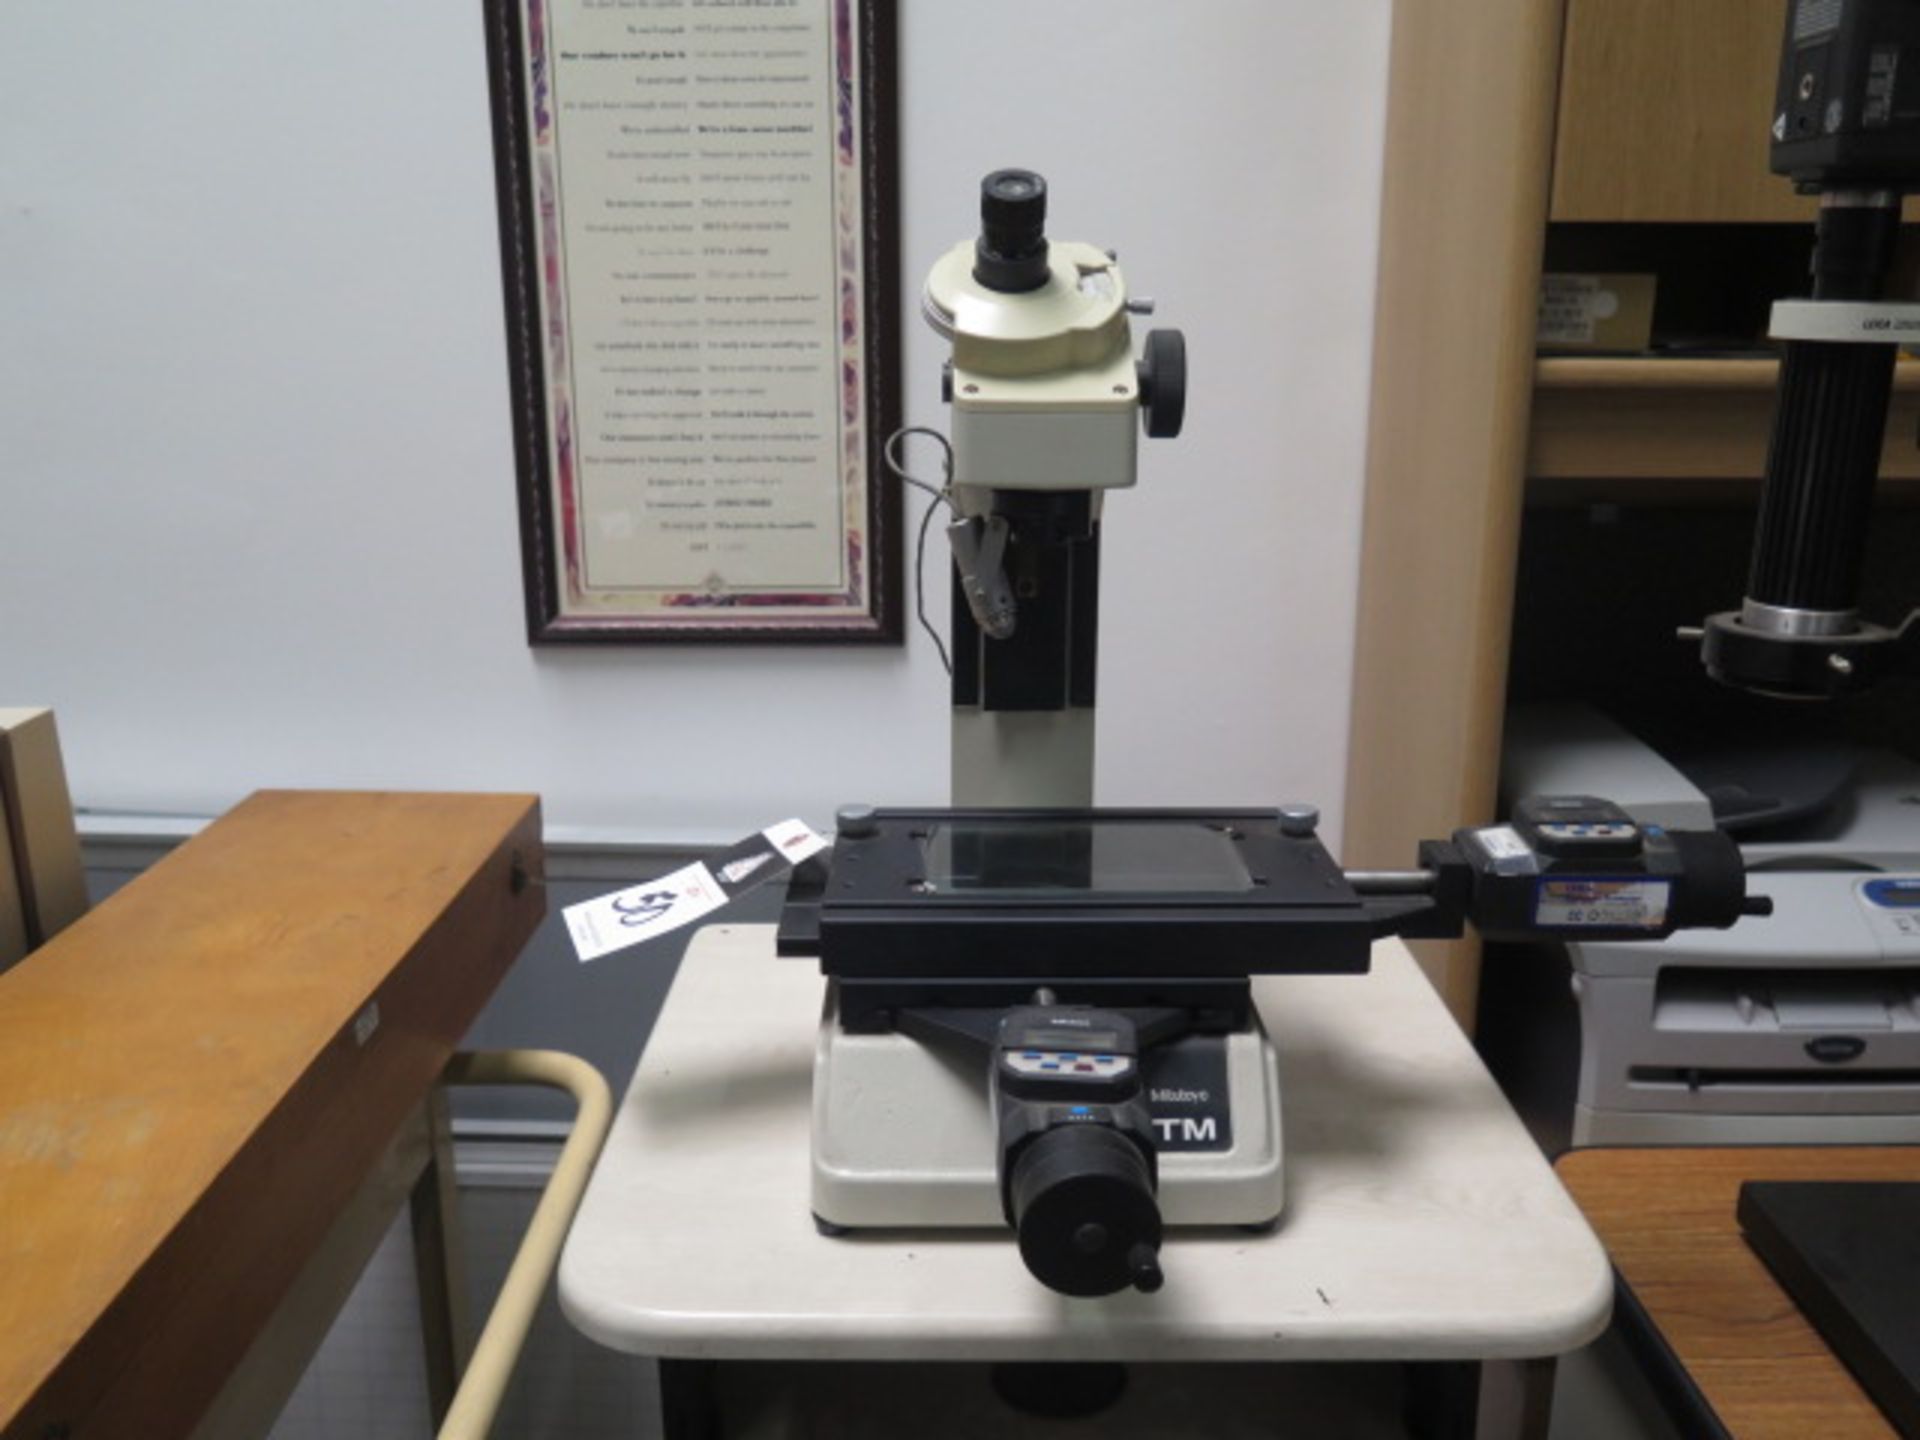 Mitutoyo mdl. TM Tool Makers Microscope w/ Digital Mic Heads, Light Source (SOLD AS-IS - NO